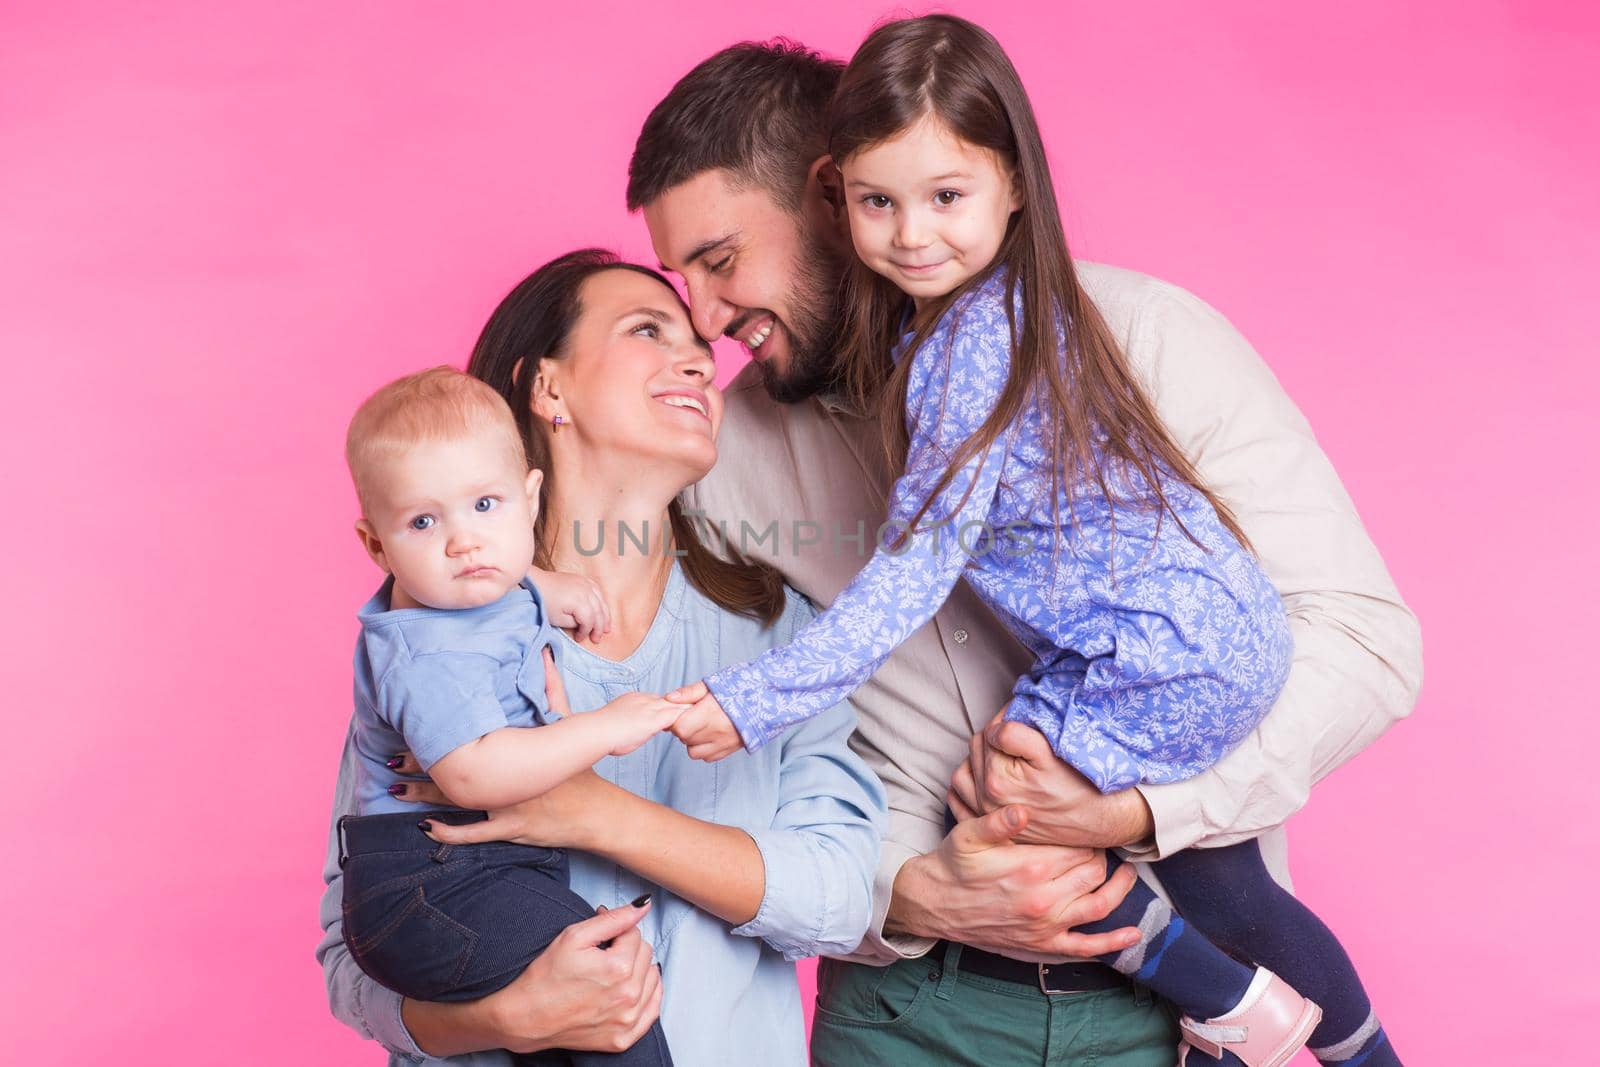 Happy family portrait smiling on pink background.